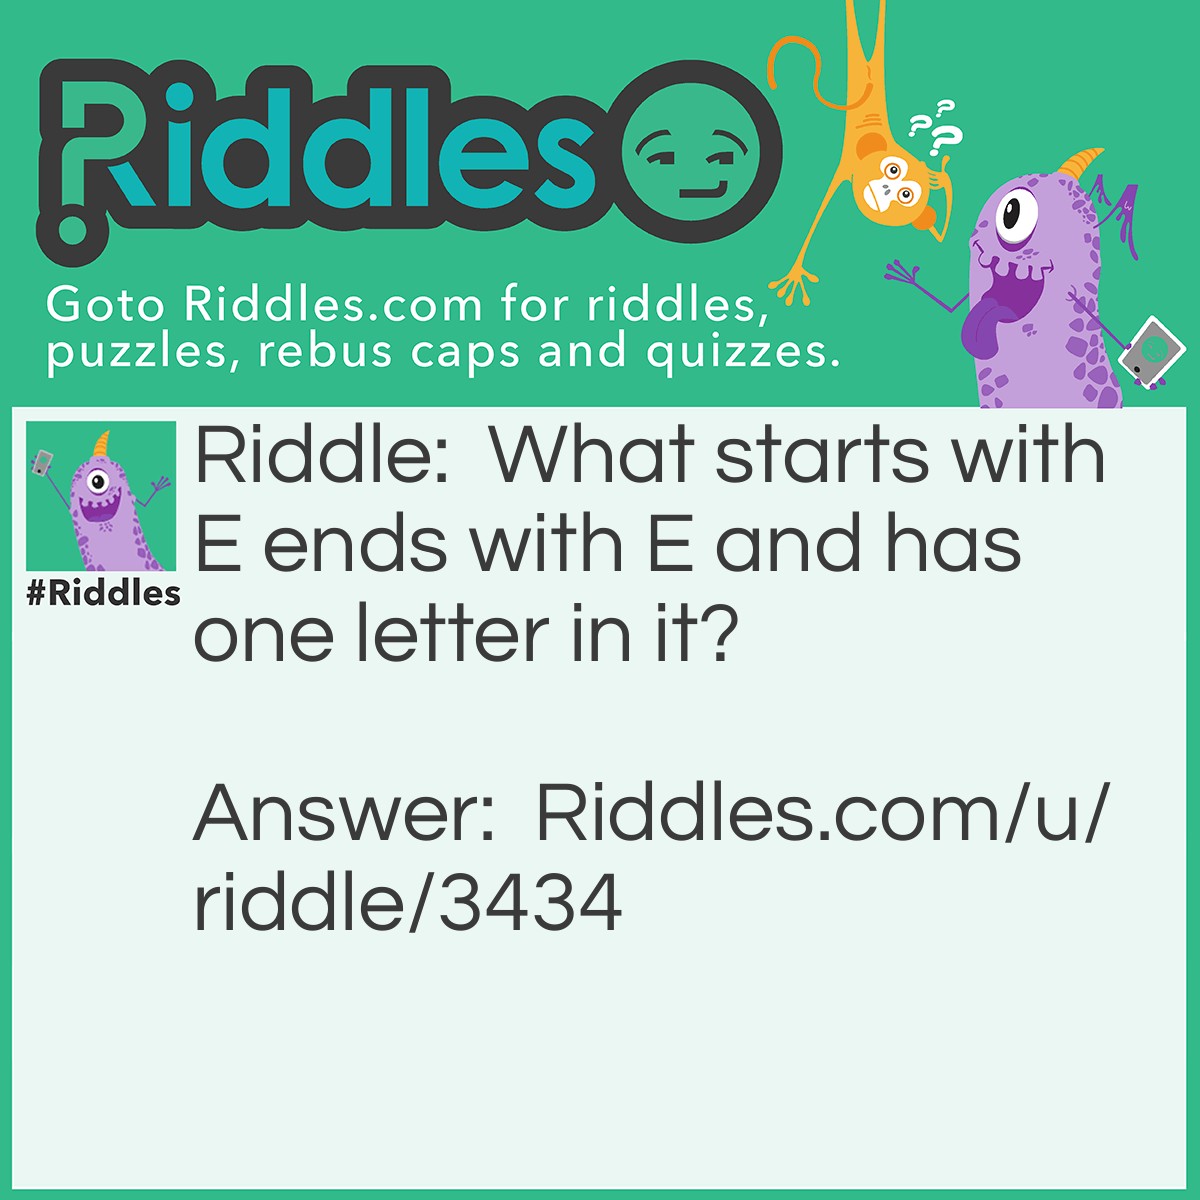 Riddle: What starts with E ends with E and has one letter in it? Answer: An envelope. :D